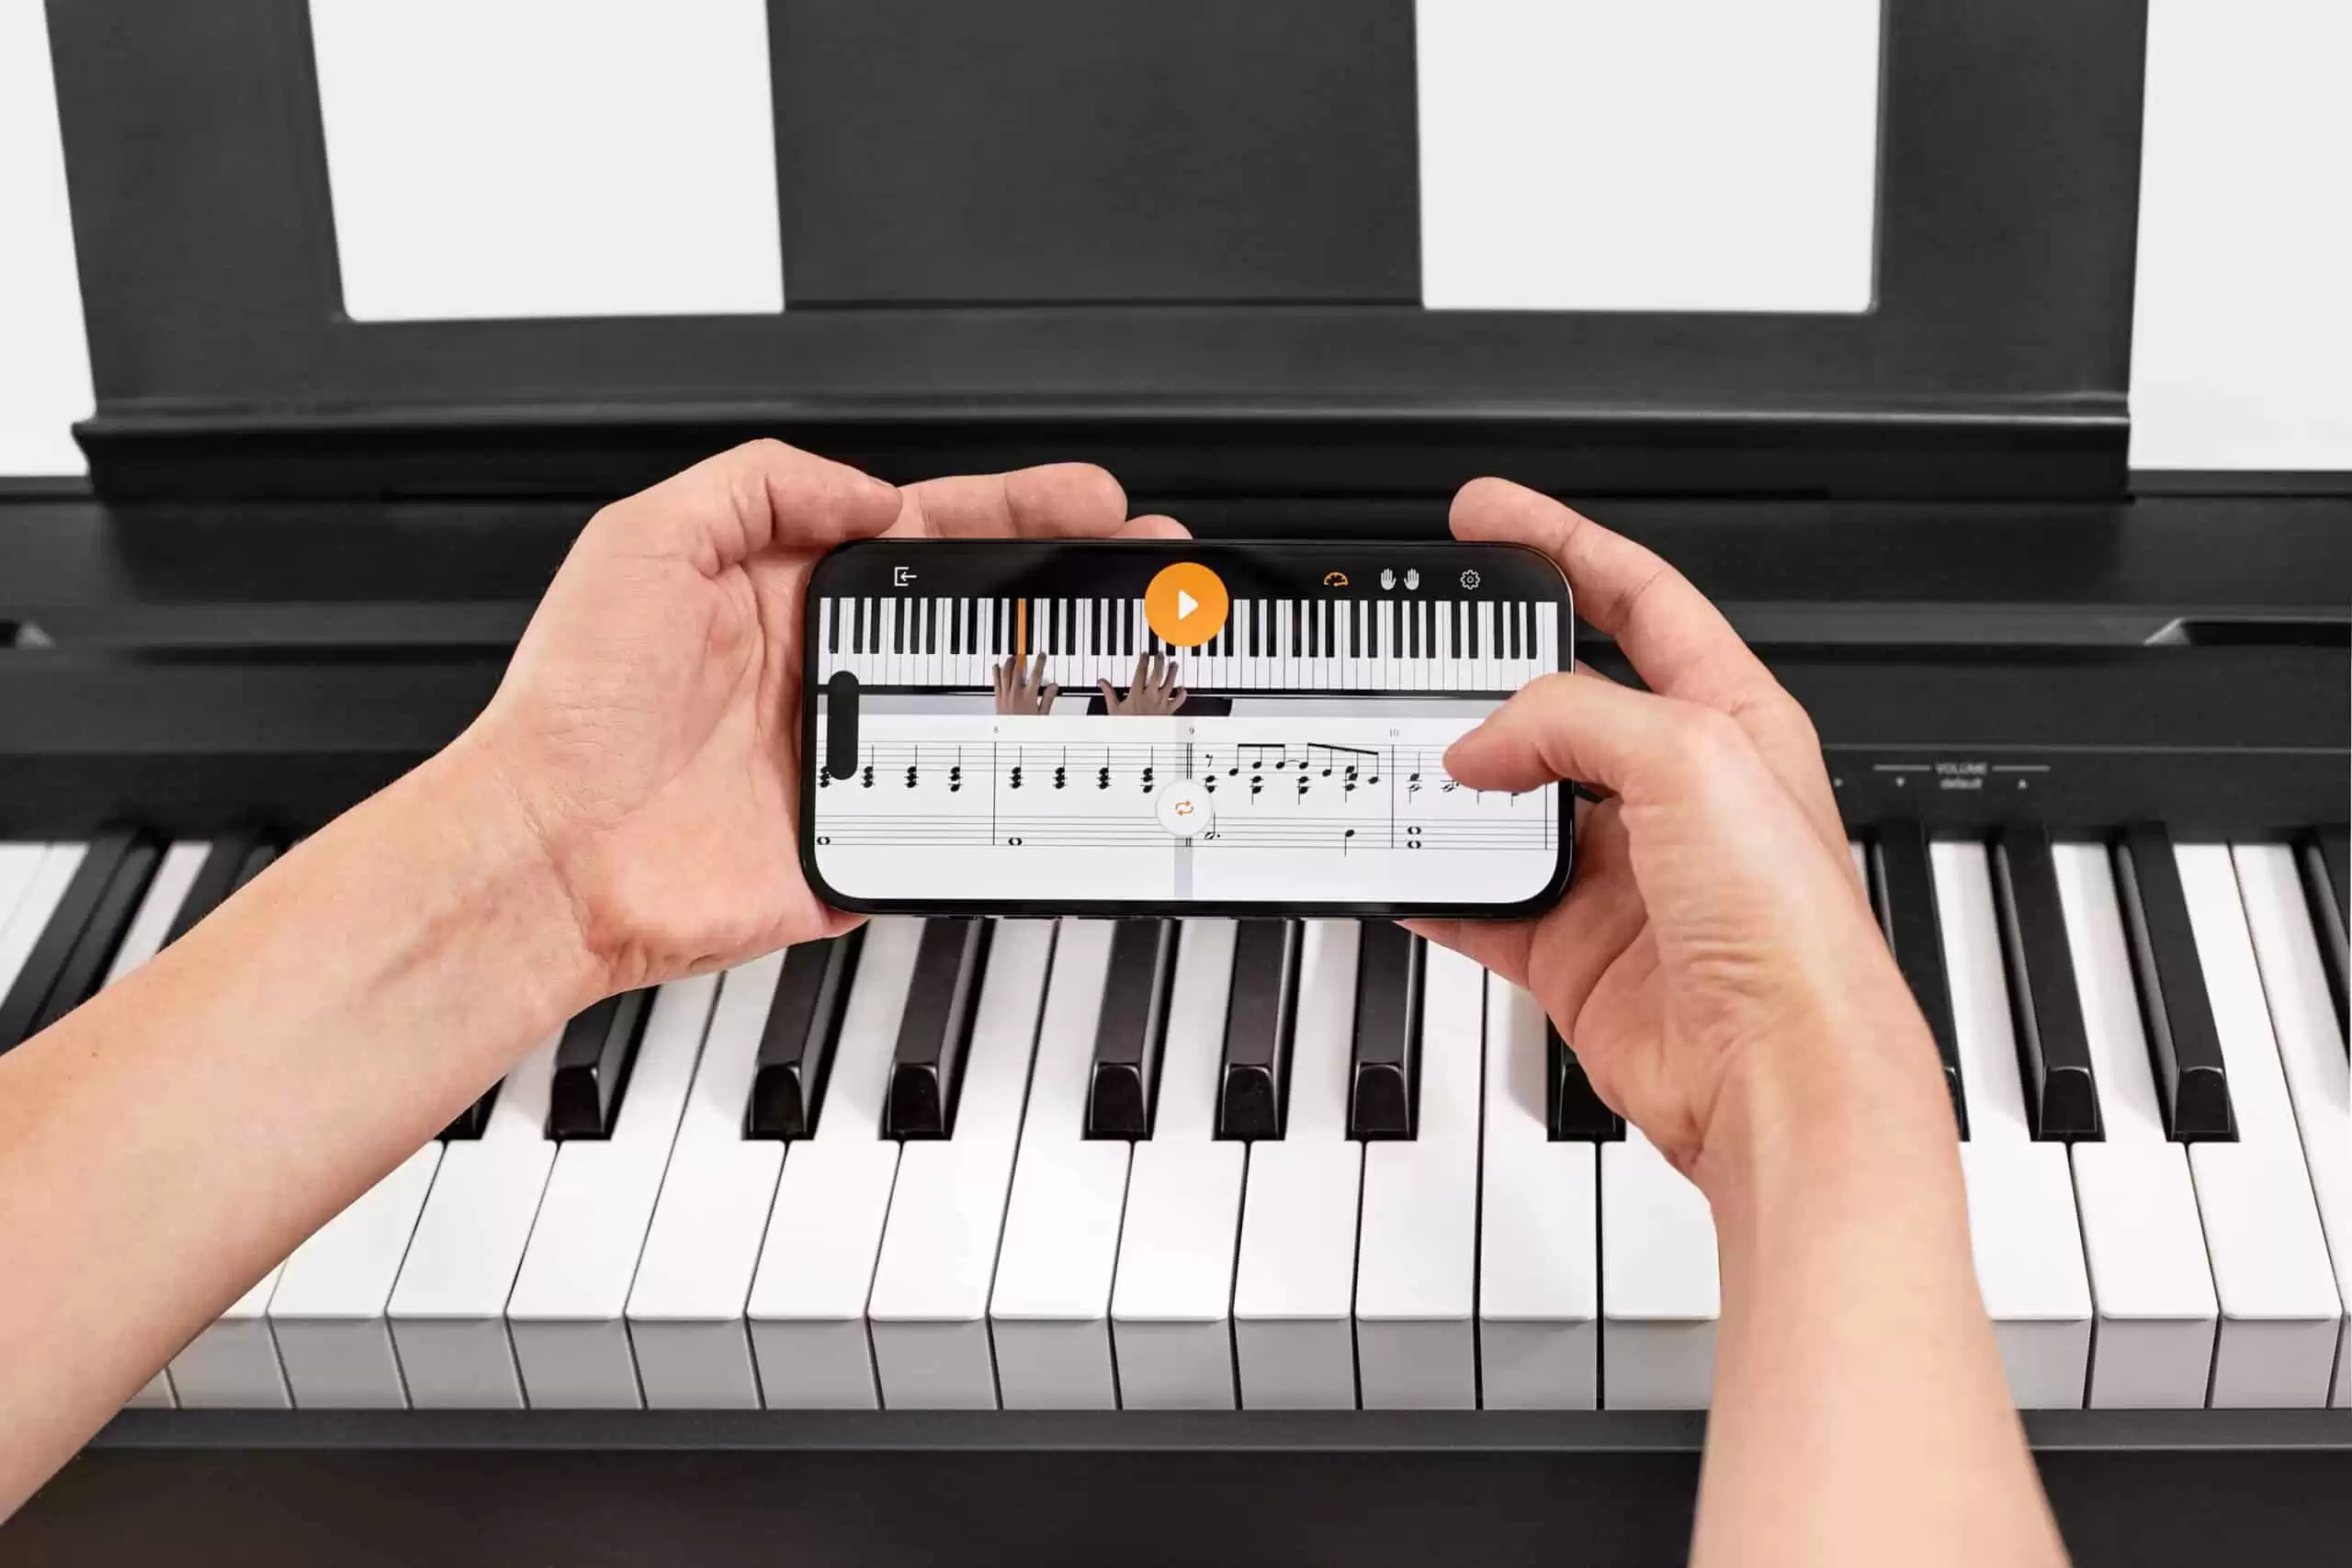 Learn How to Play Piano Online - Piano Learning App | flowkey